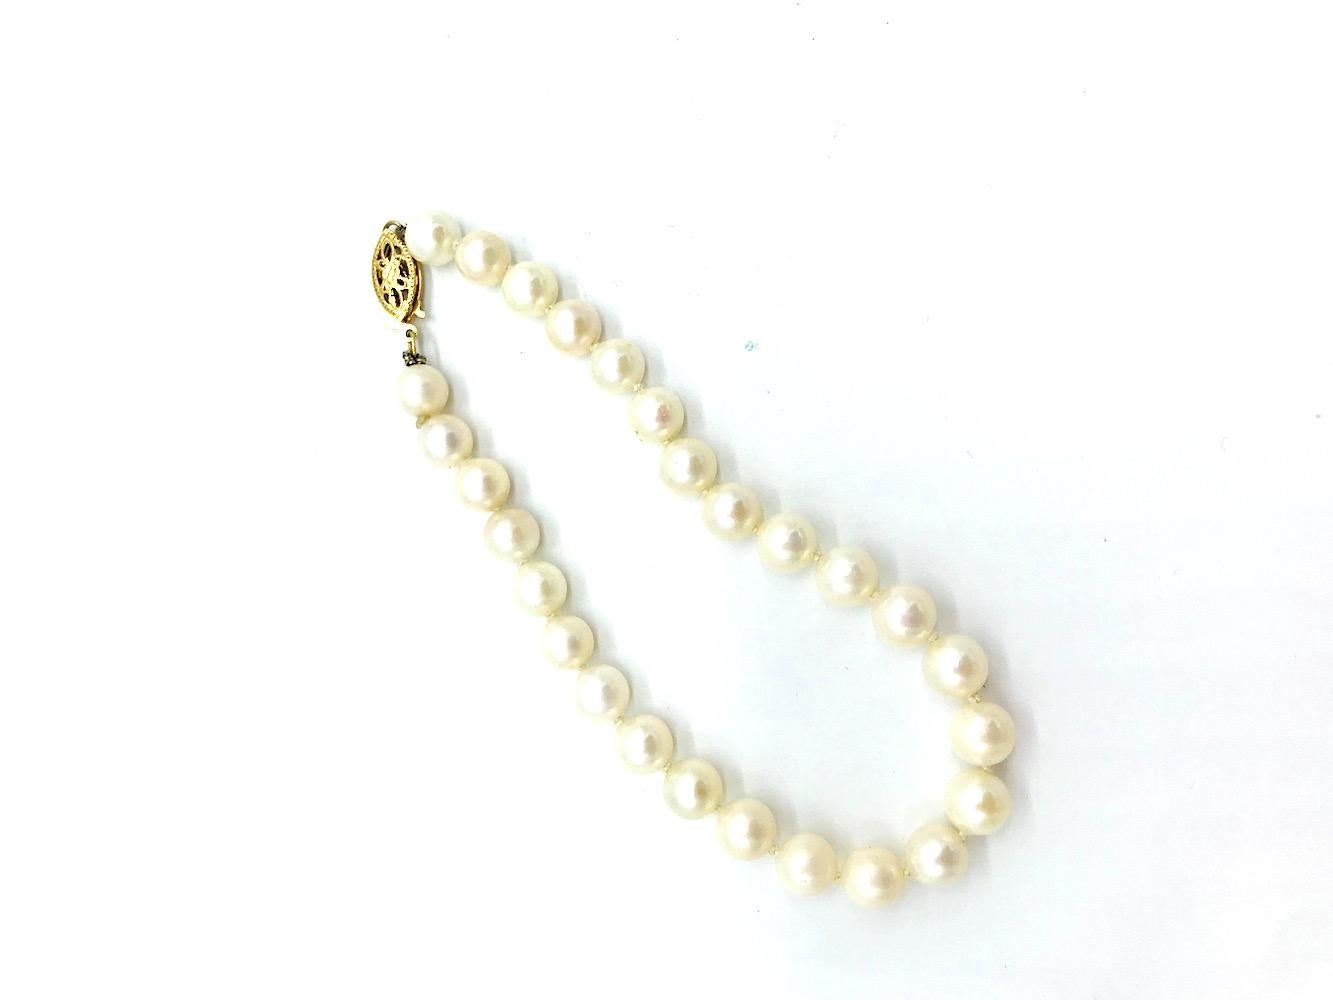 Qualiity Pearl Braclet, 5.90 mm 14 kt
Length 7.75 inches. High luster and quality AAA.